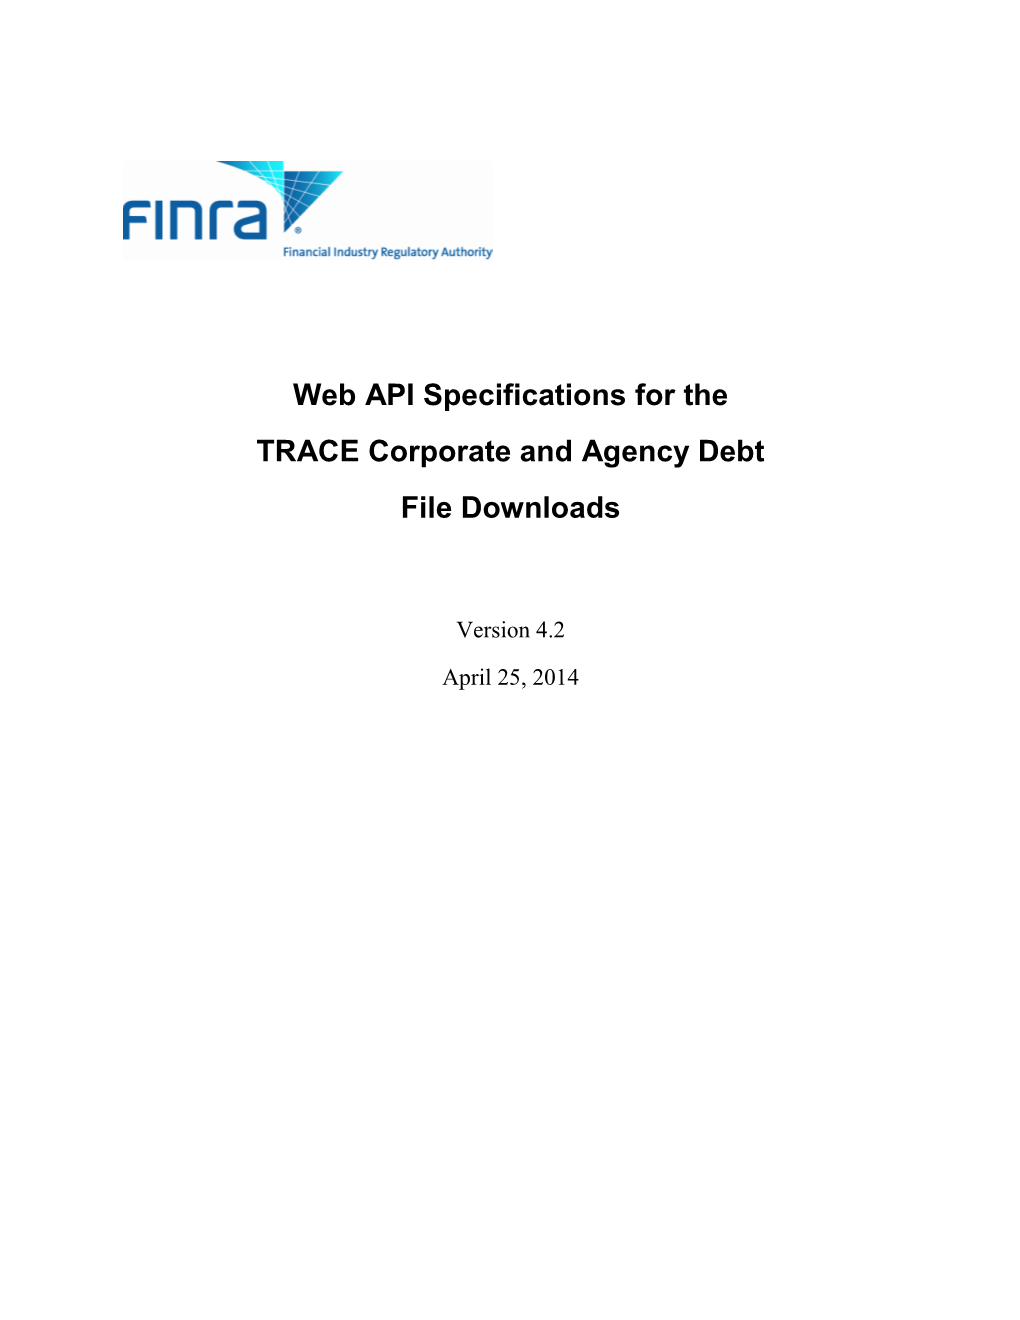 TRACE Web API Specification for Corporate and Agency Debt